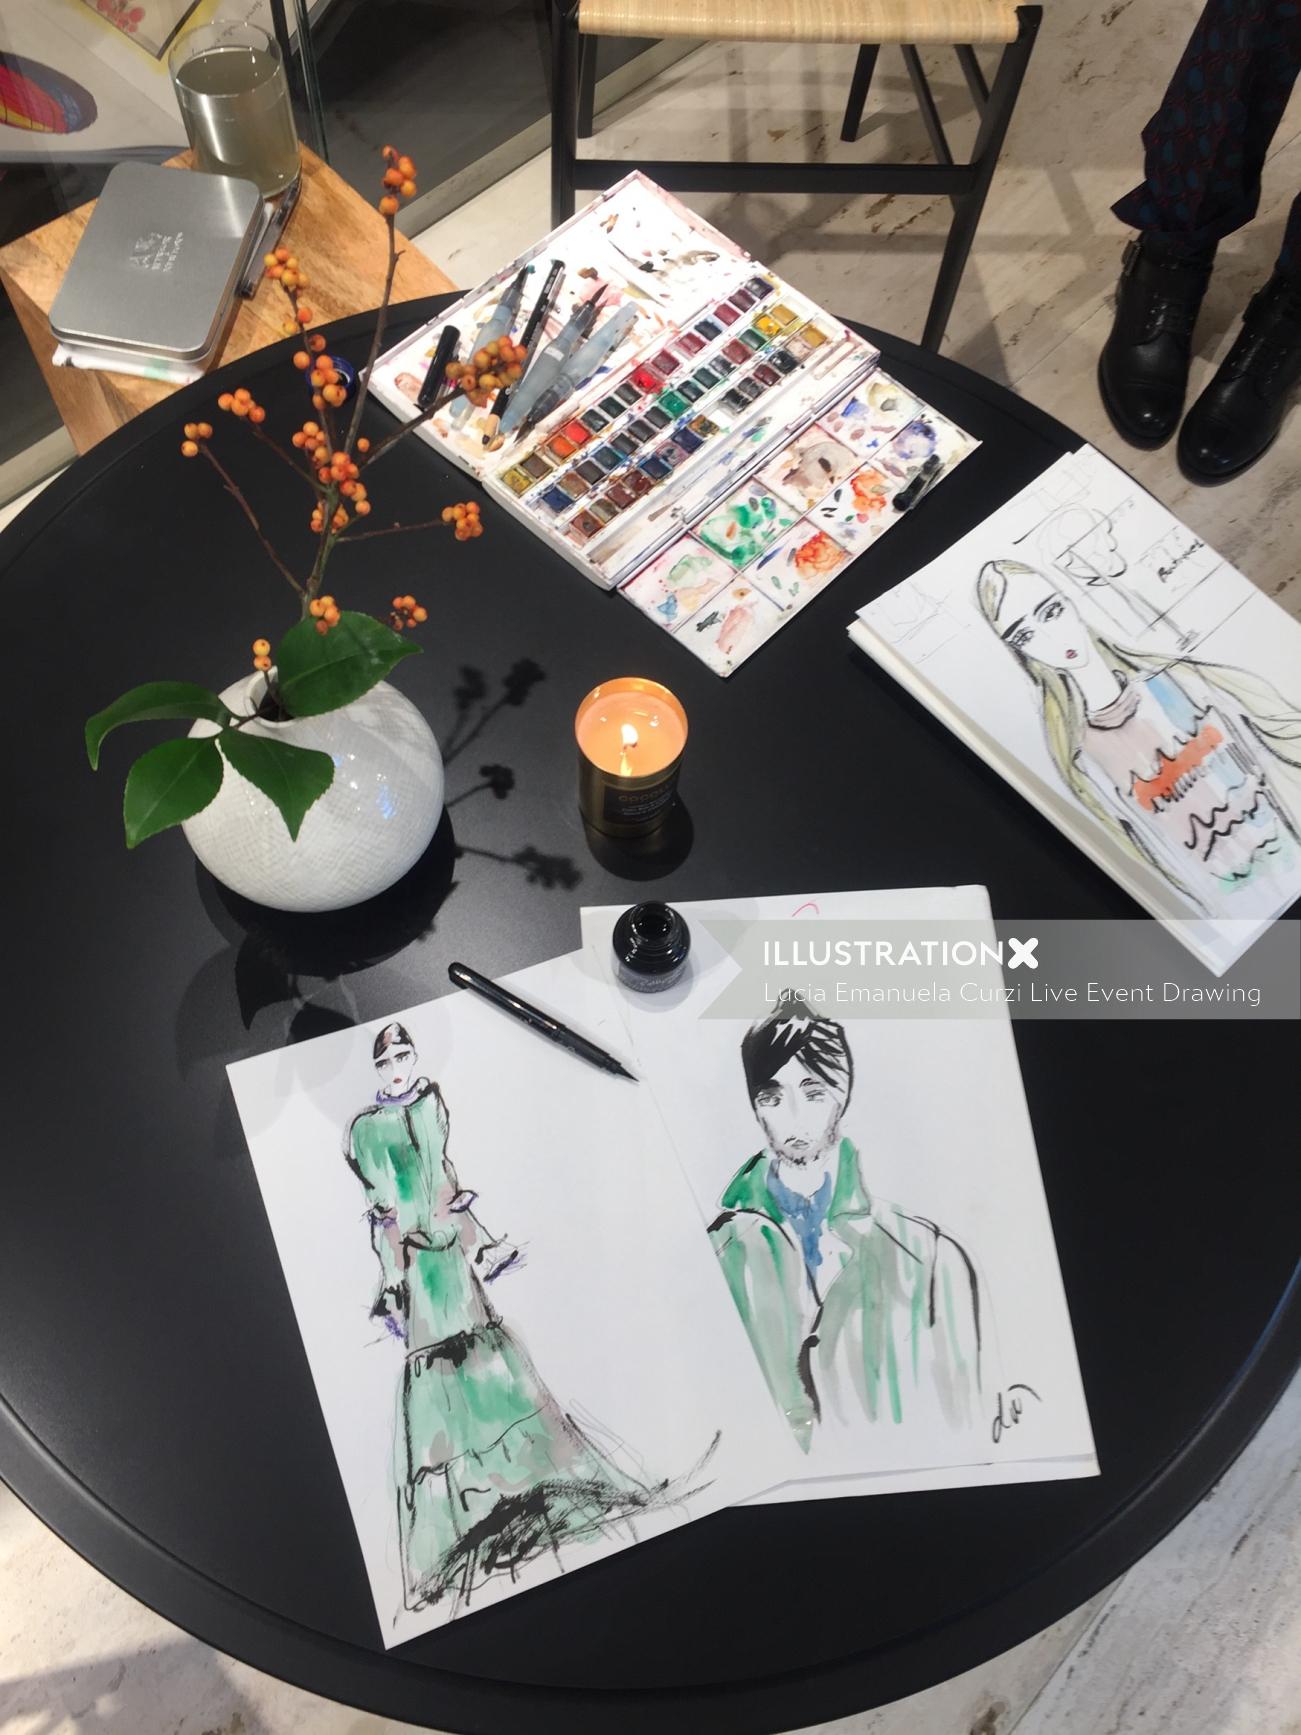 Live event drawing on table
